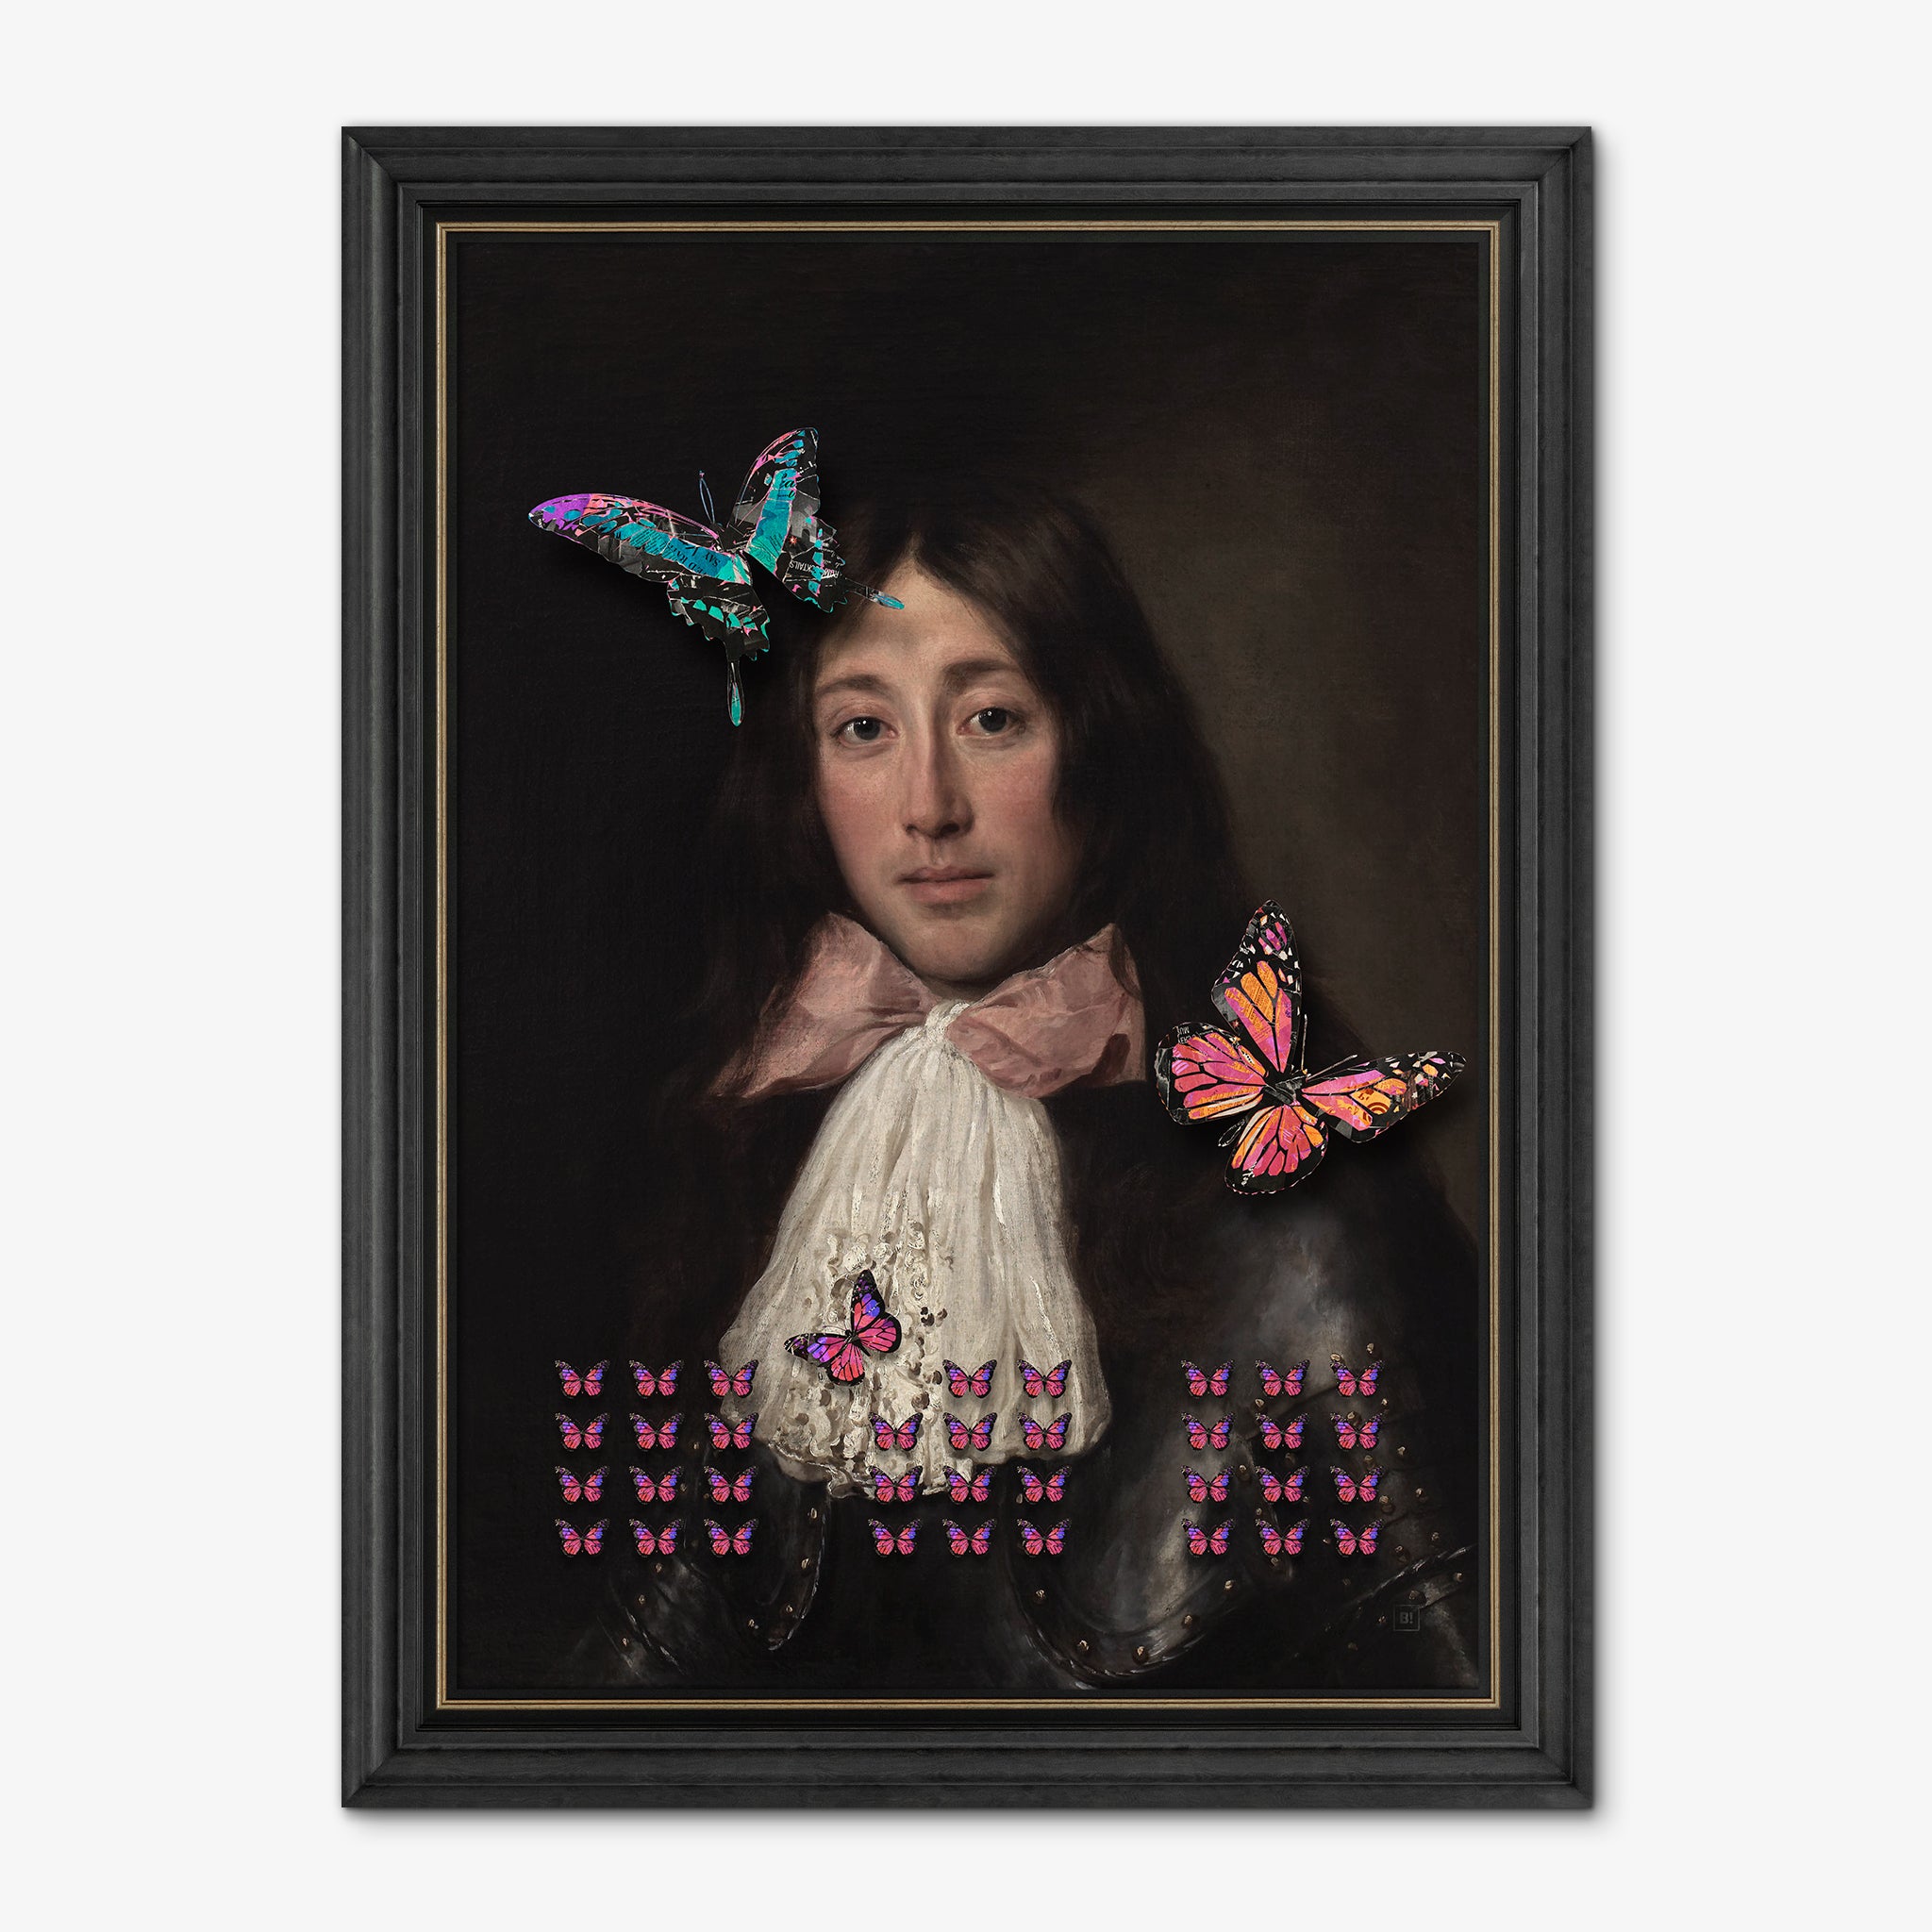 Be inspired by our altered soldier with pink tie and butterflies art print. This artwork was printed using the giclée process on archival acid-free paper and is presented in a vintage black frame with gold border that captures its timeless beauty in every detail.